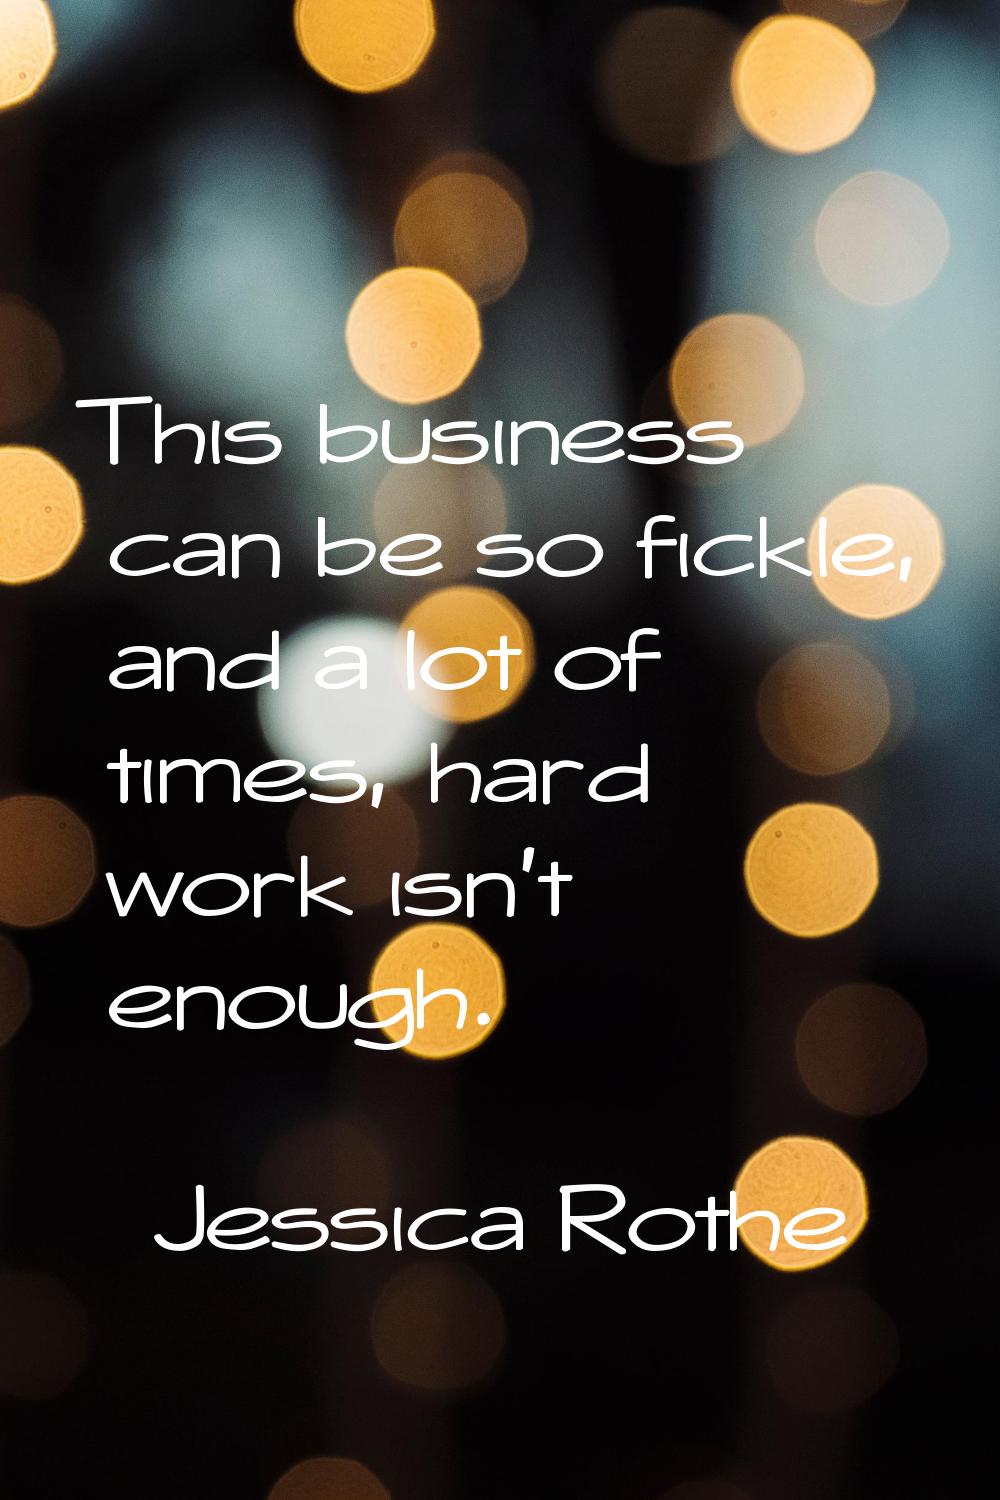 This business can be so fickle, and a lot of times, hard work isn't enough.